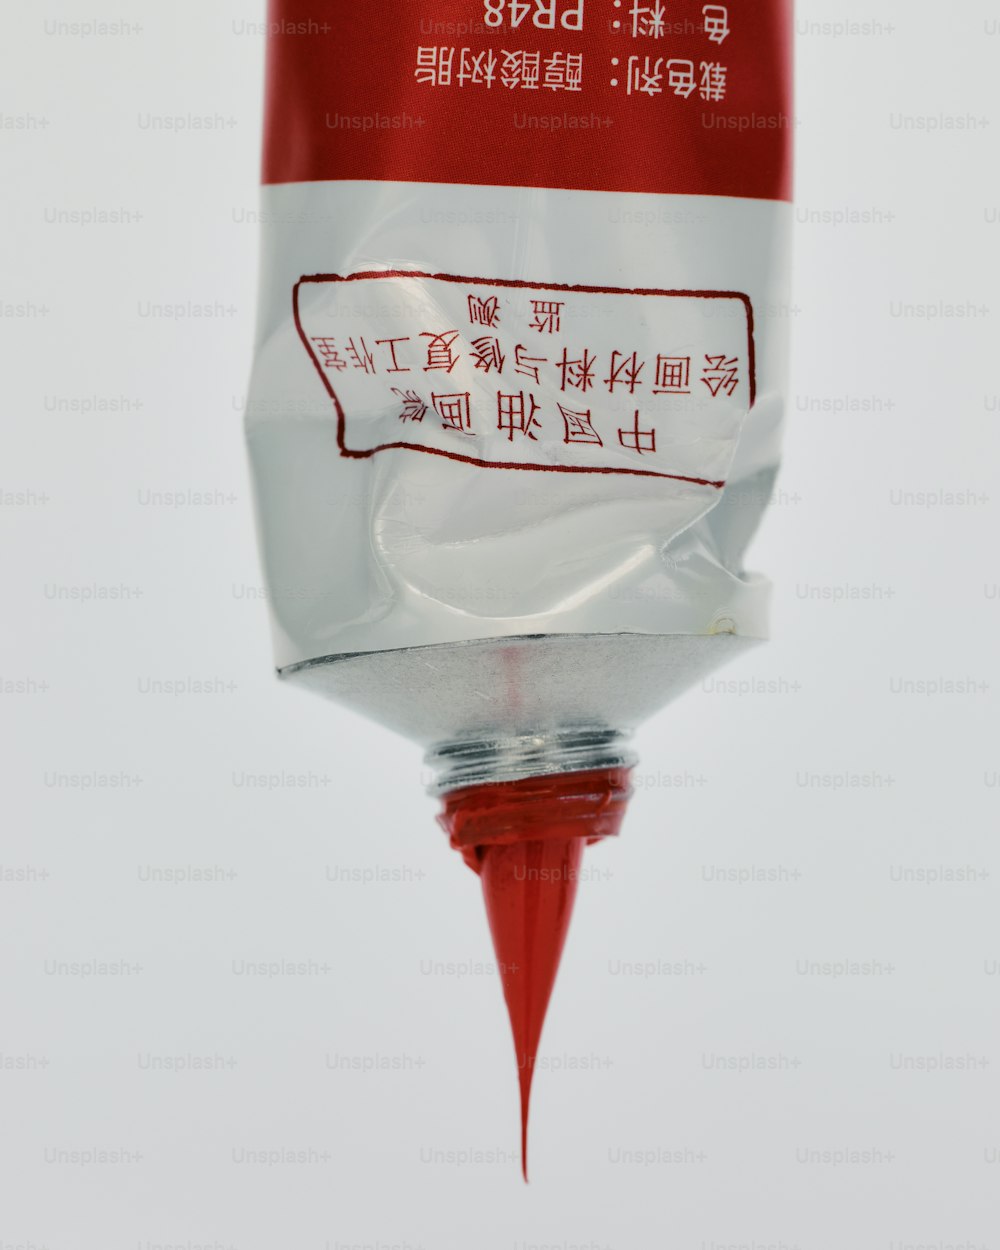 a close up of a red and white object with chinese writing on it